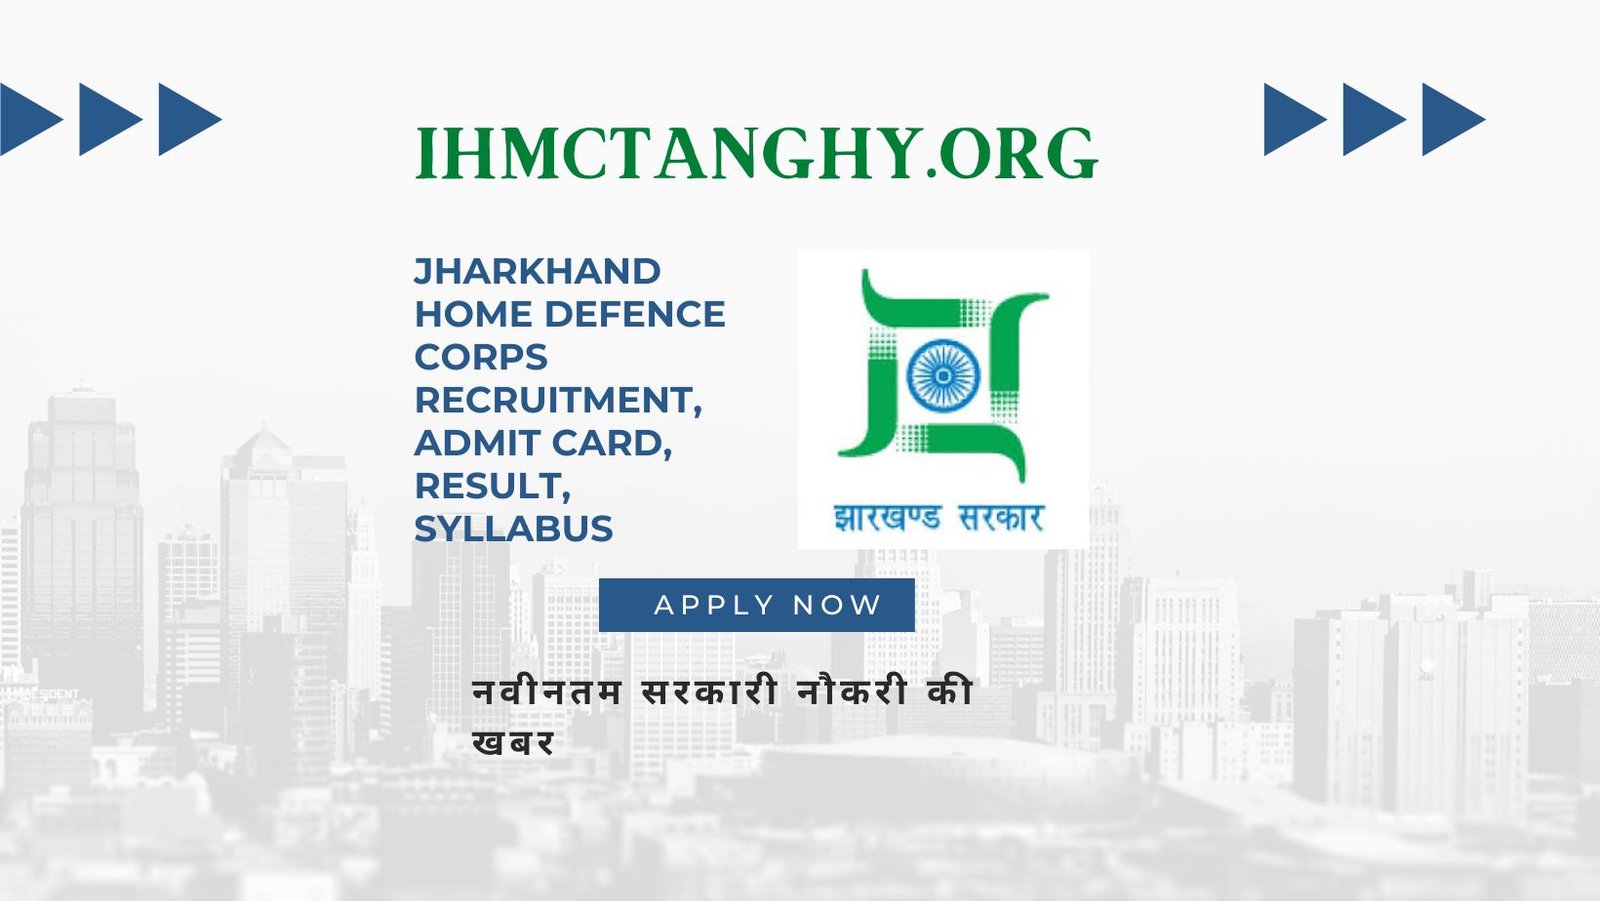 Jharkhand Home Defence Corps Recruitment